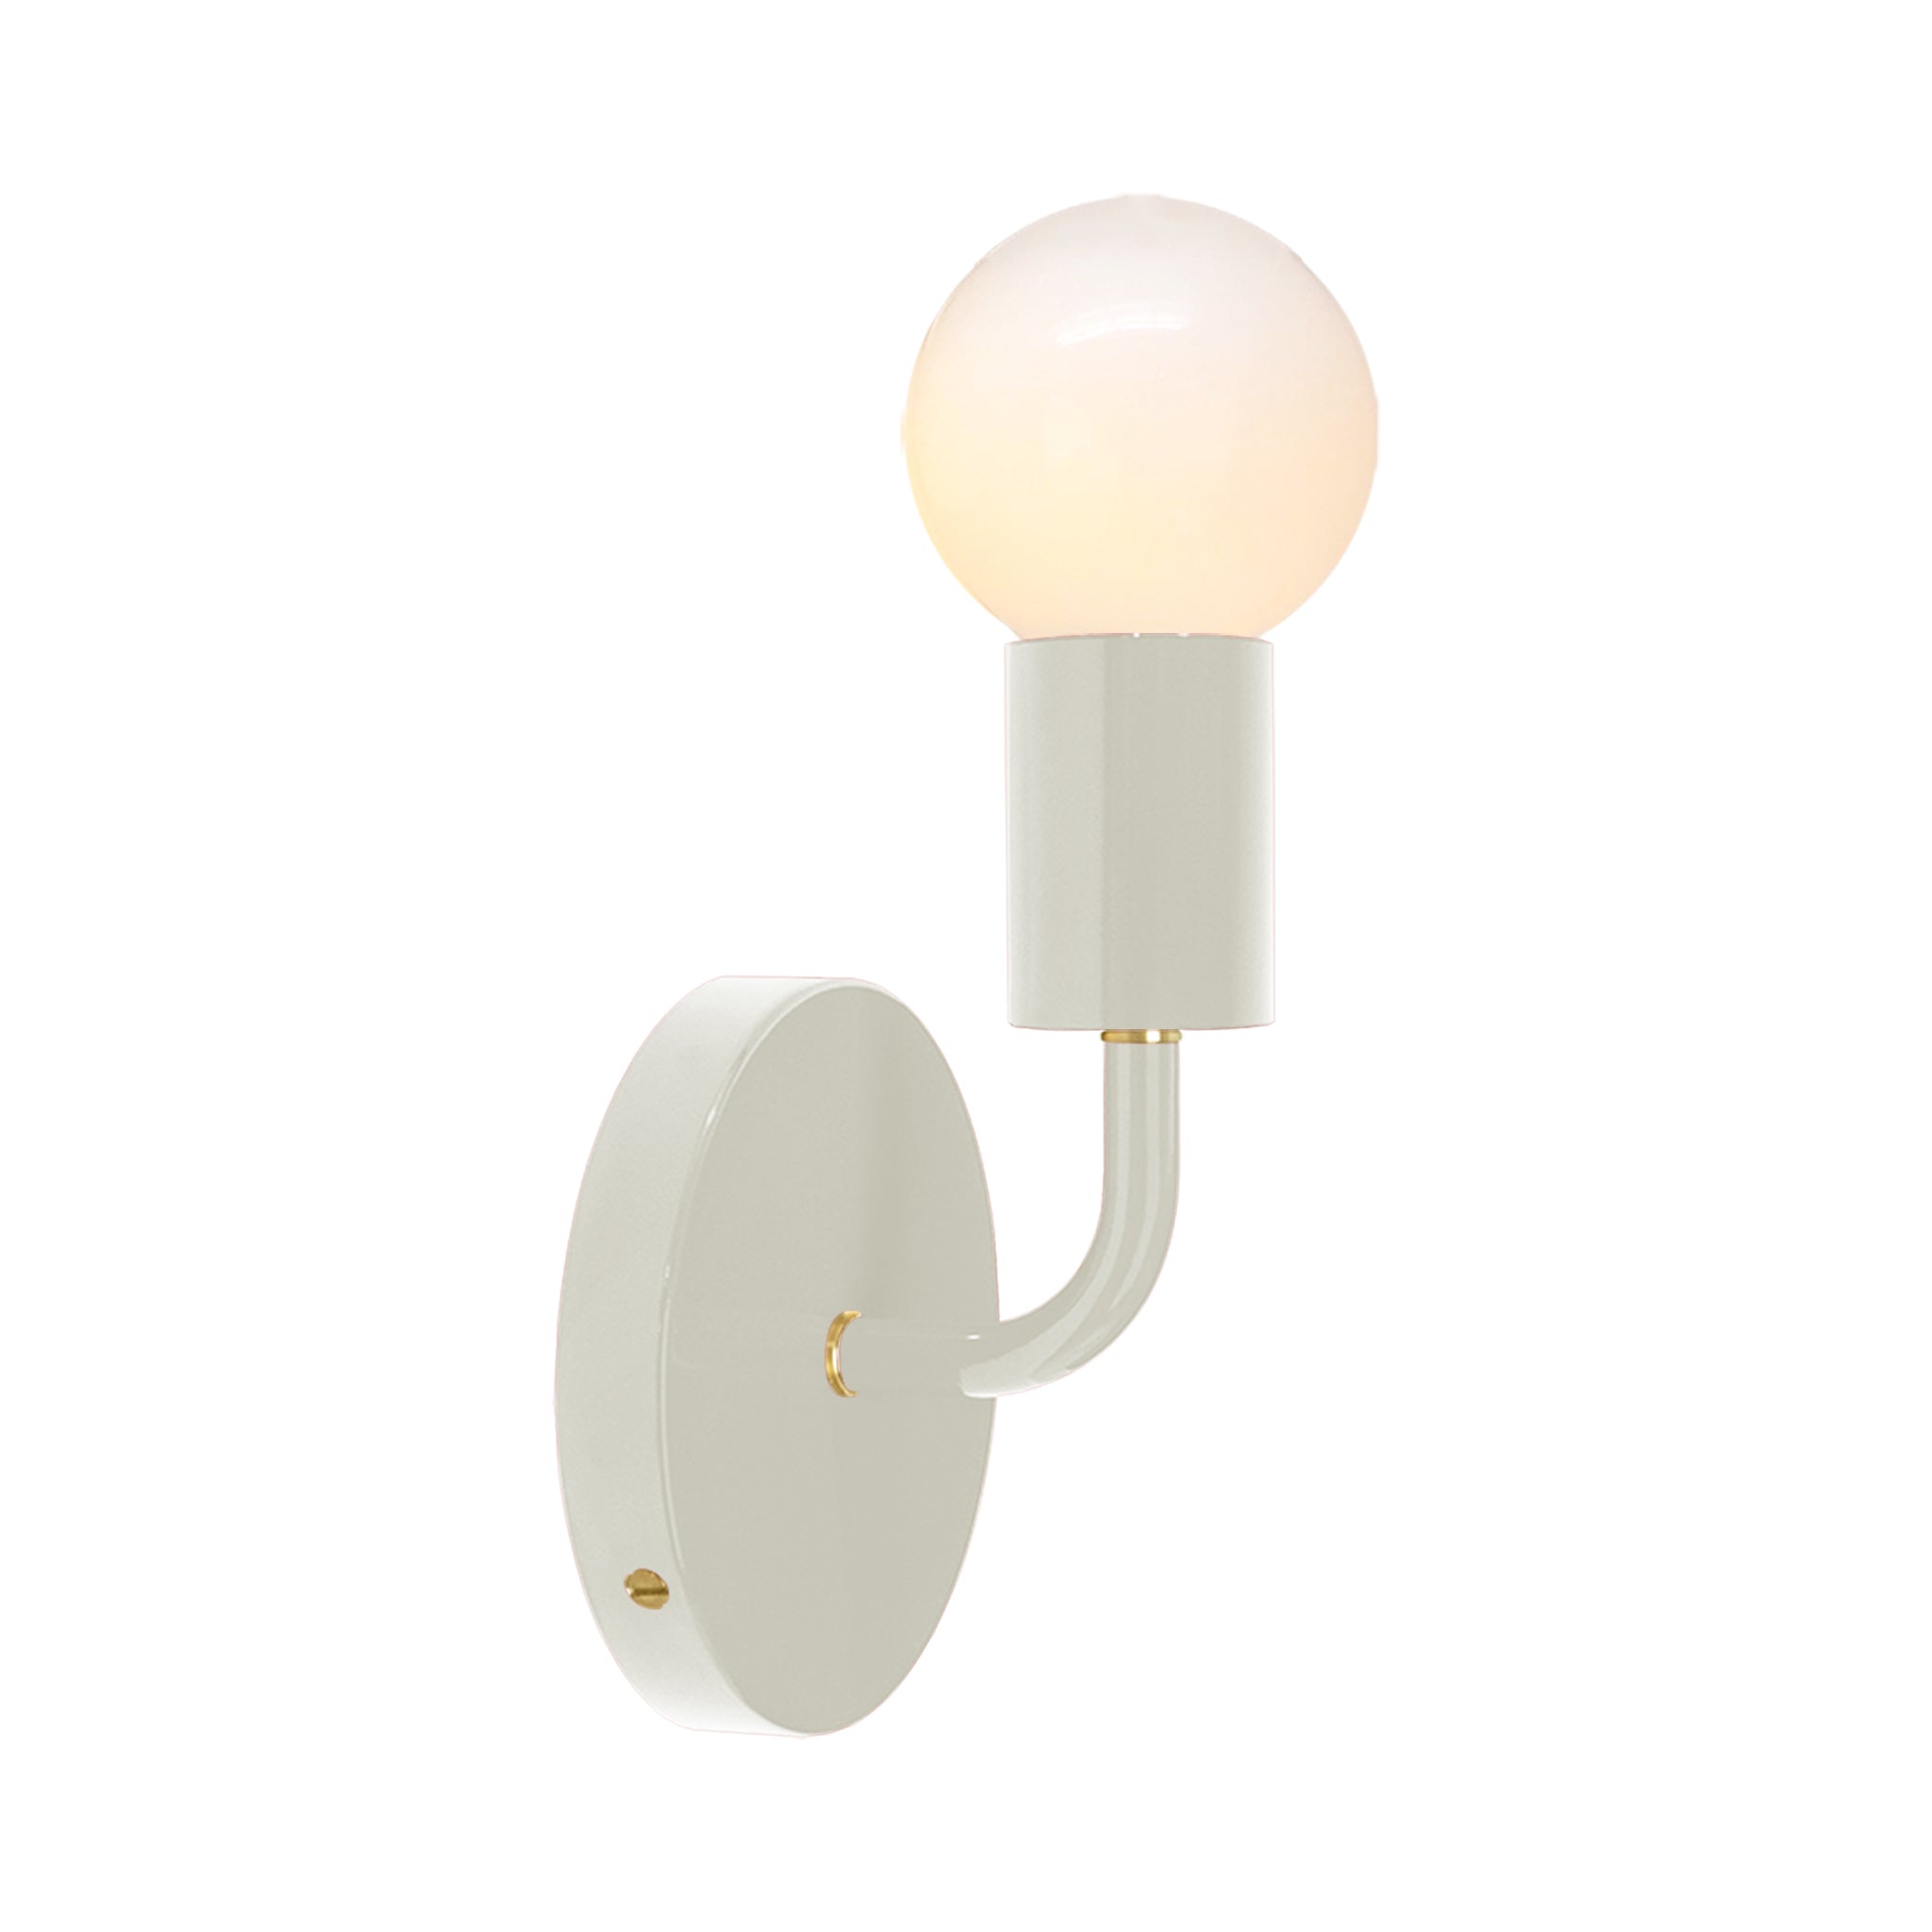 Brass and bone color Snug sconce Dutton Brown lighting